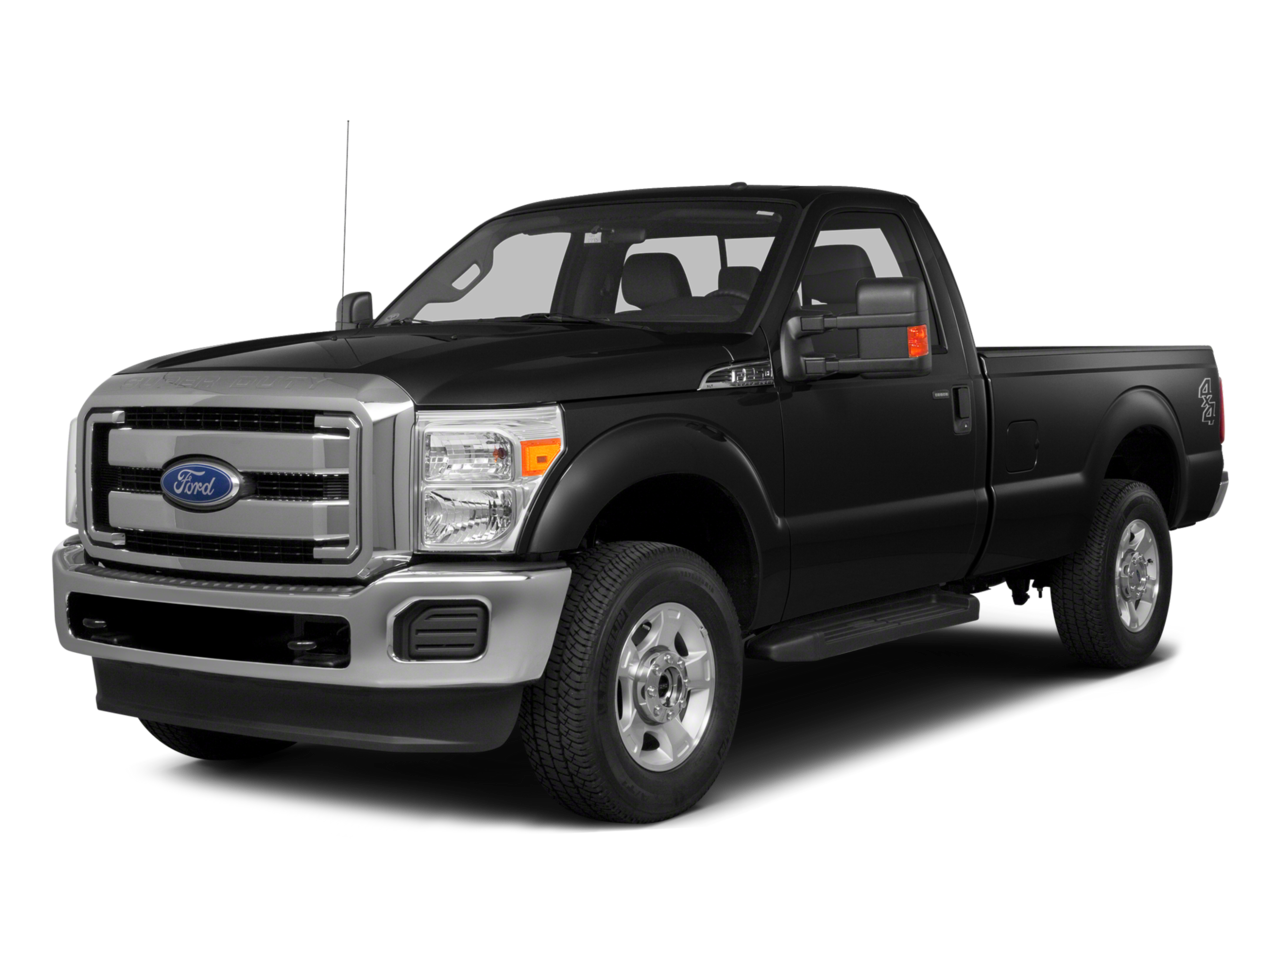 2015 Ford F-250 Super Duty Repair: Service and Maintenance Cost